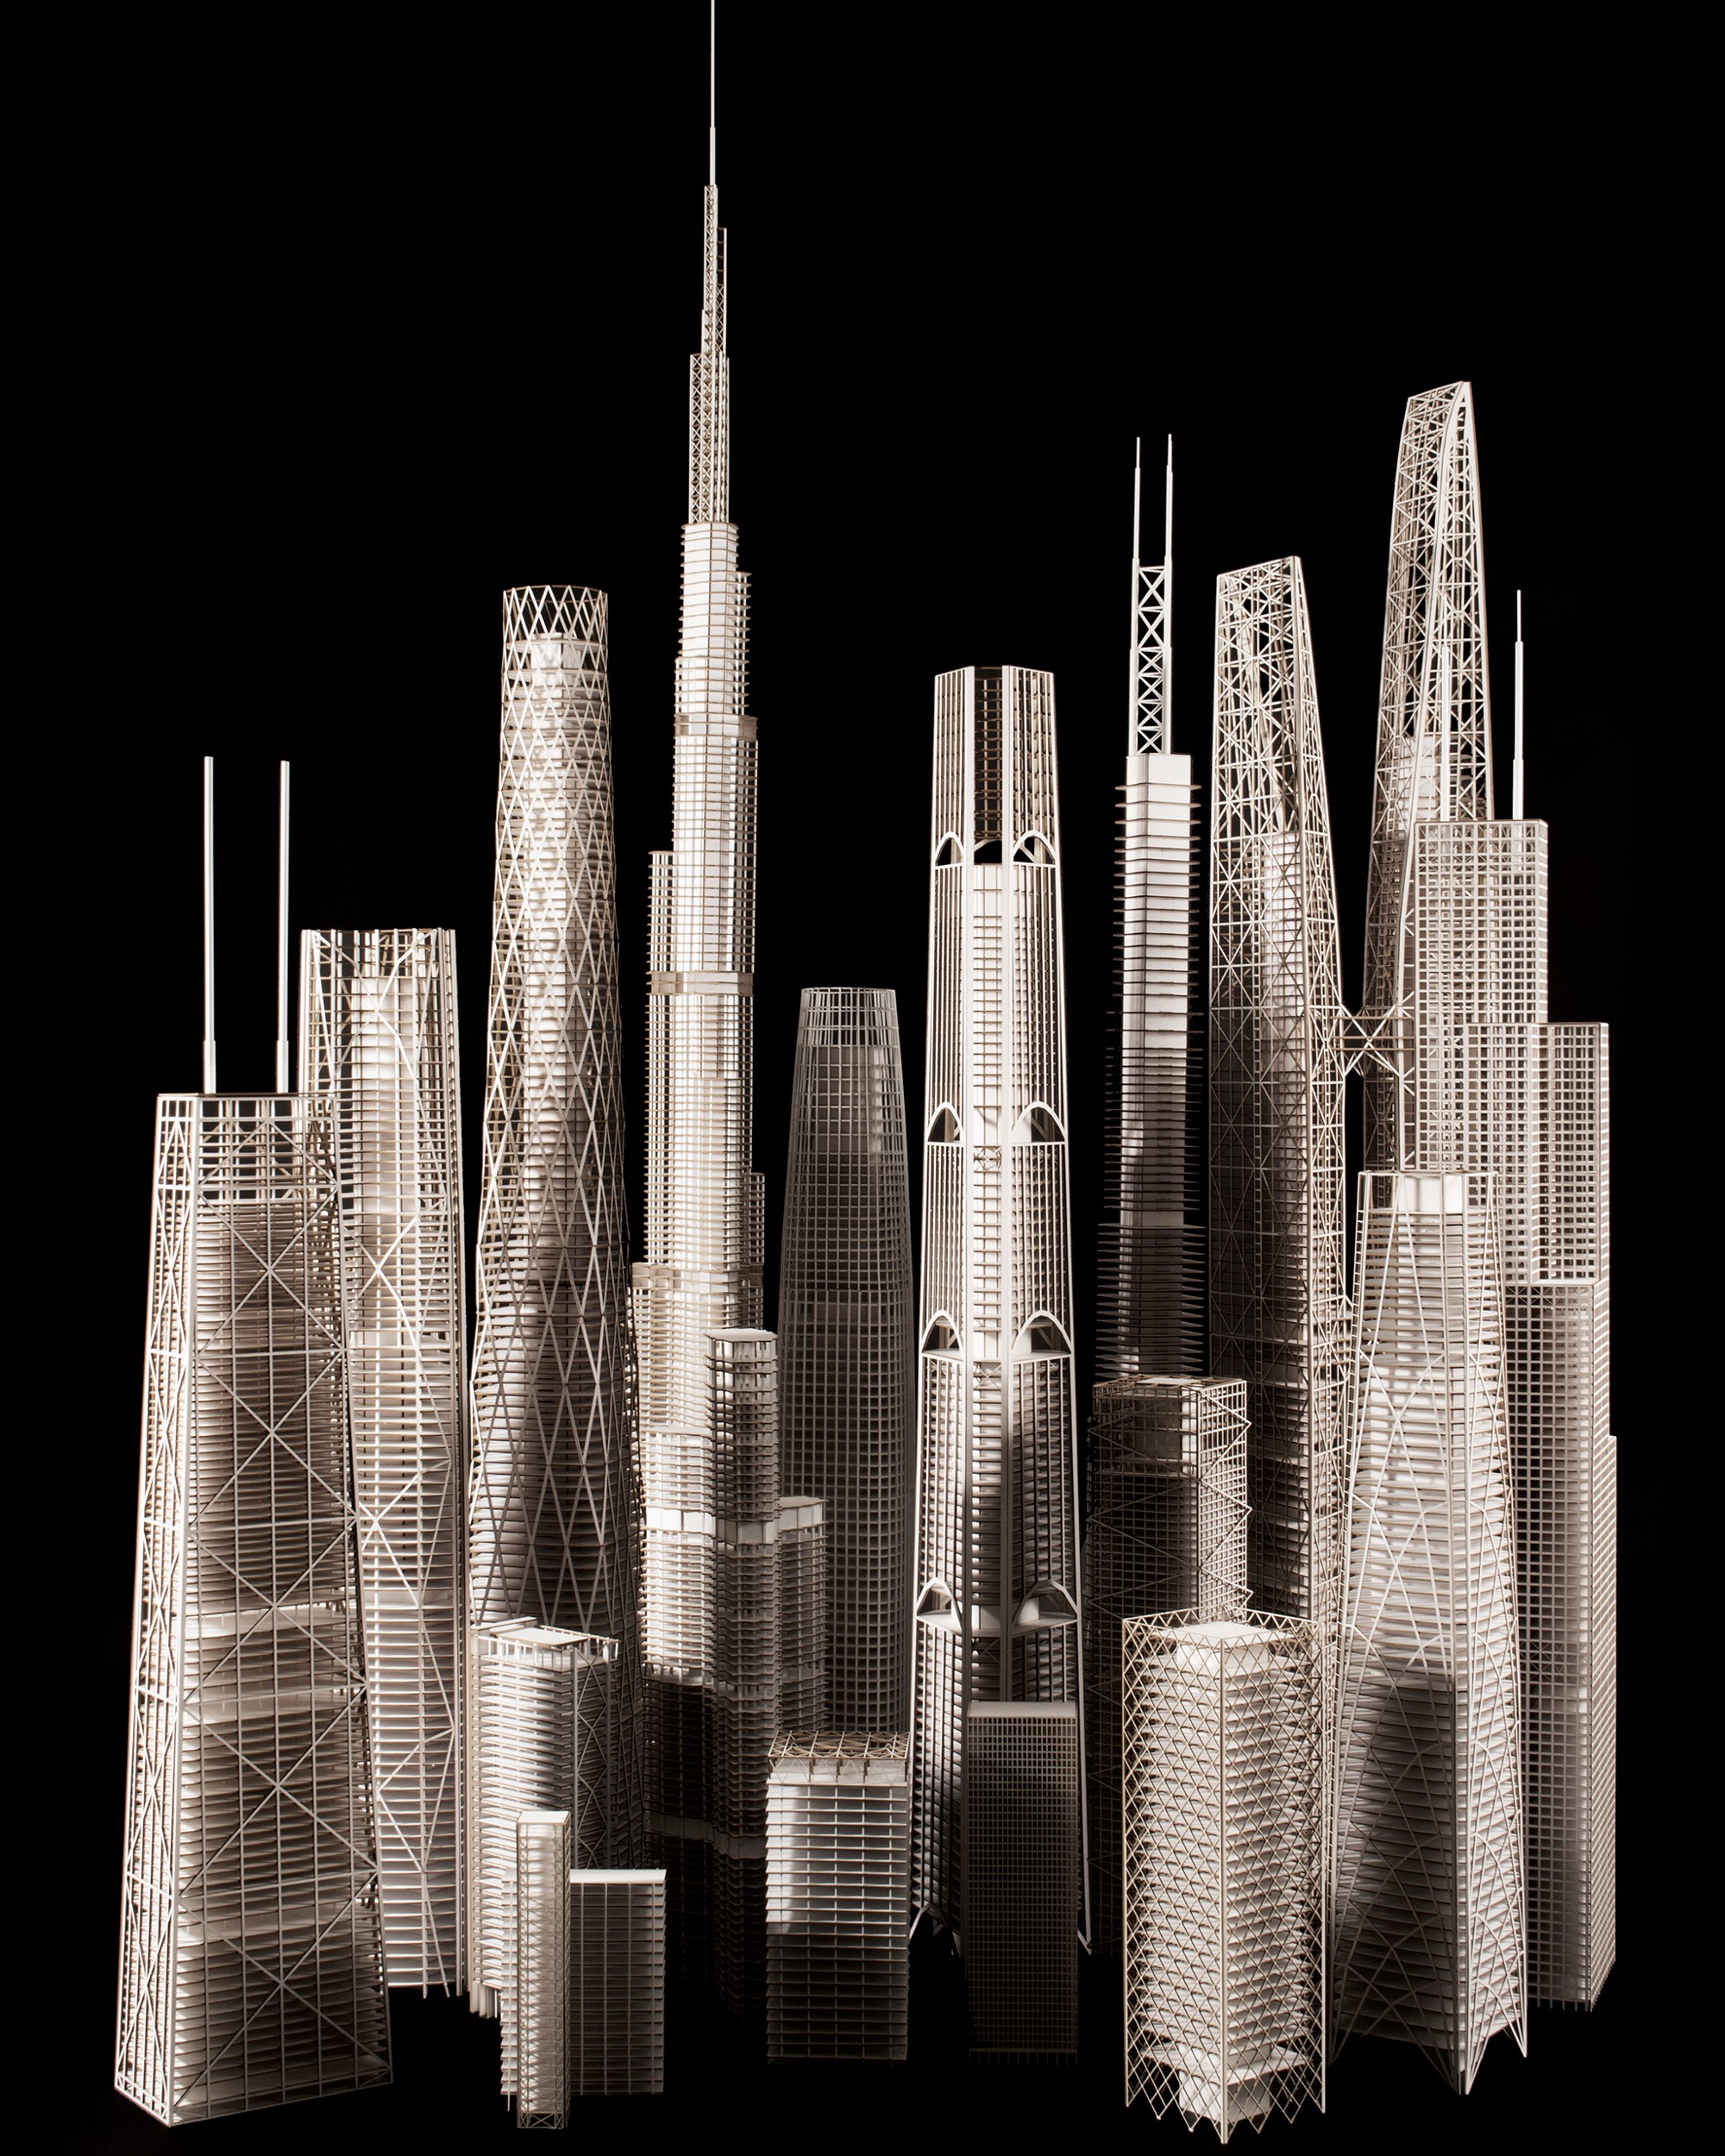 Engineering Architecture: 20 Models Reveal How Skyscrapers Work